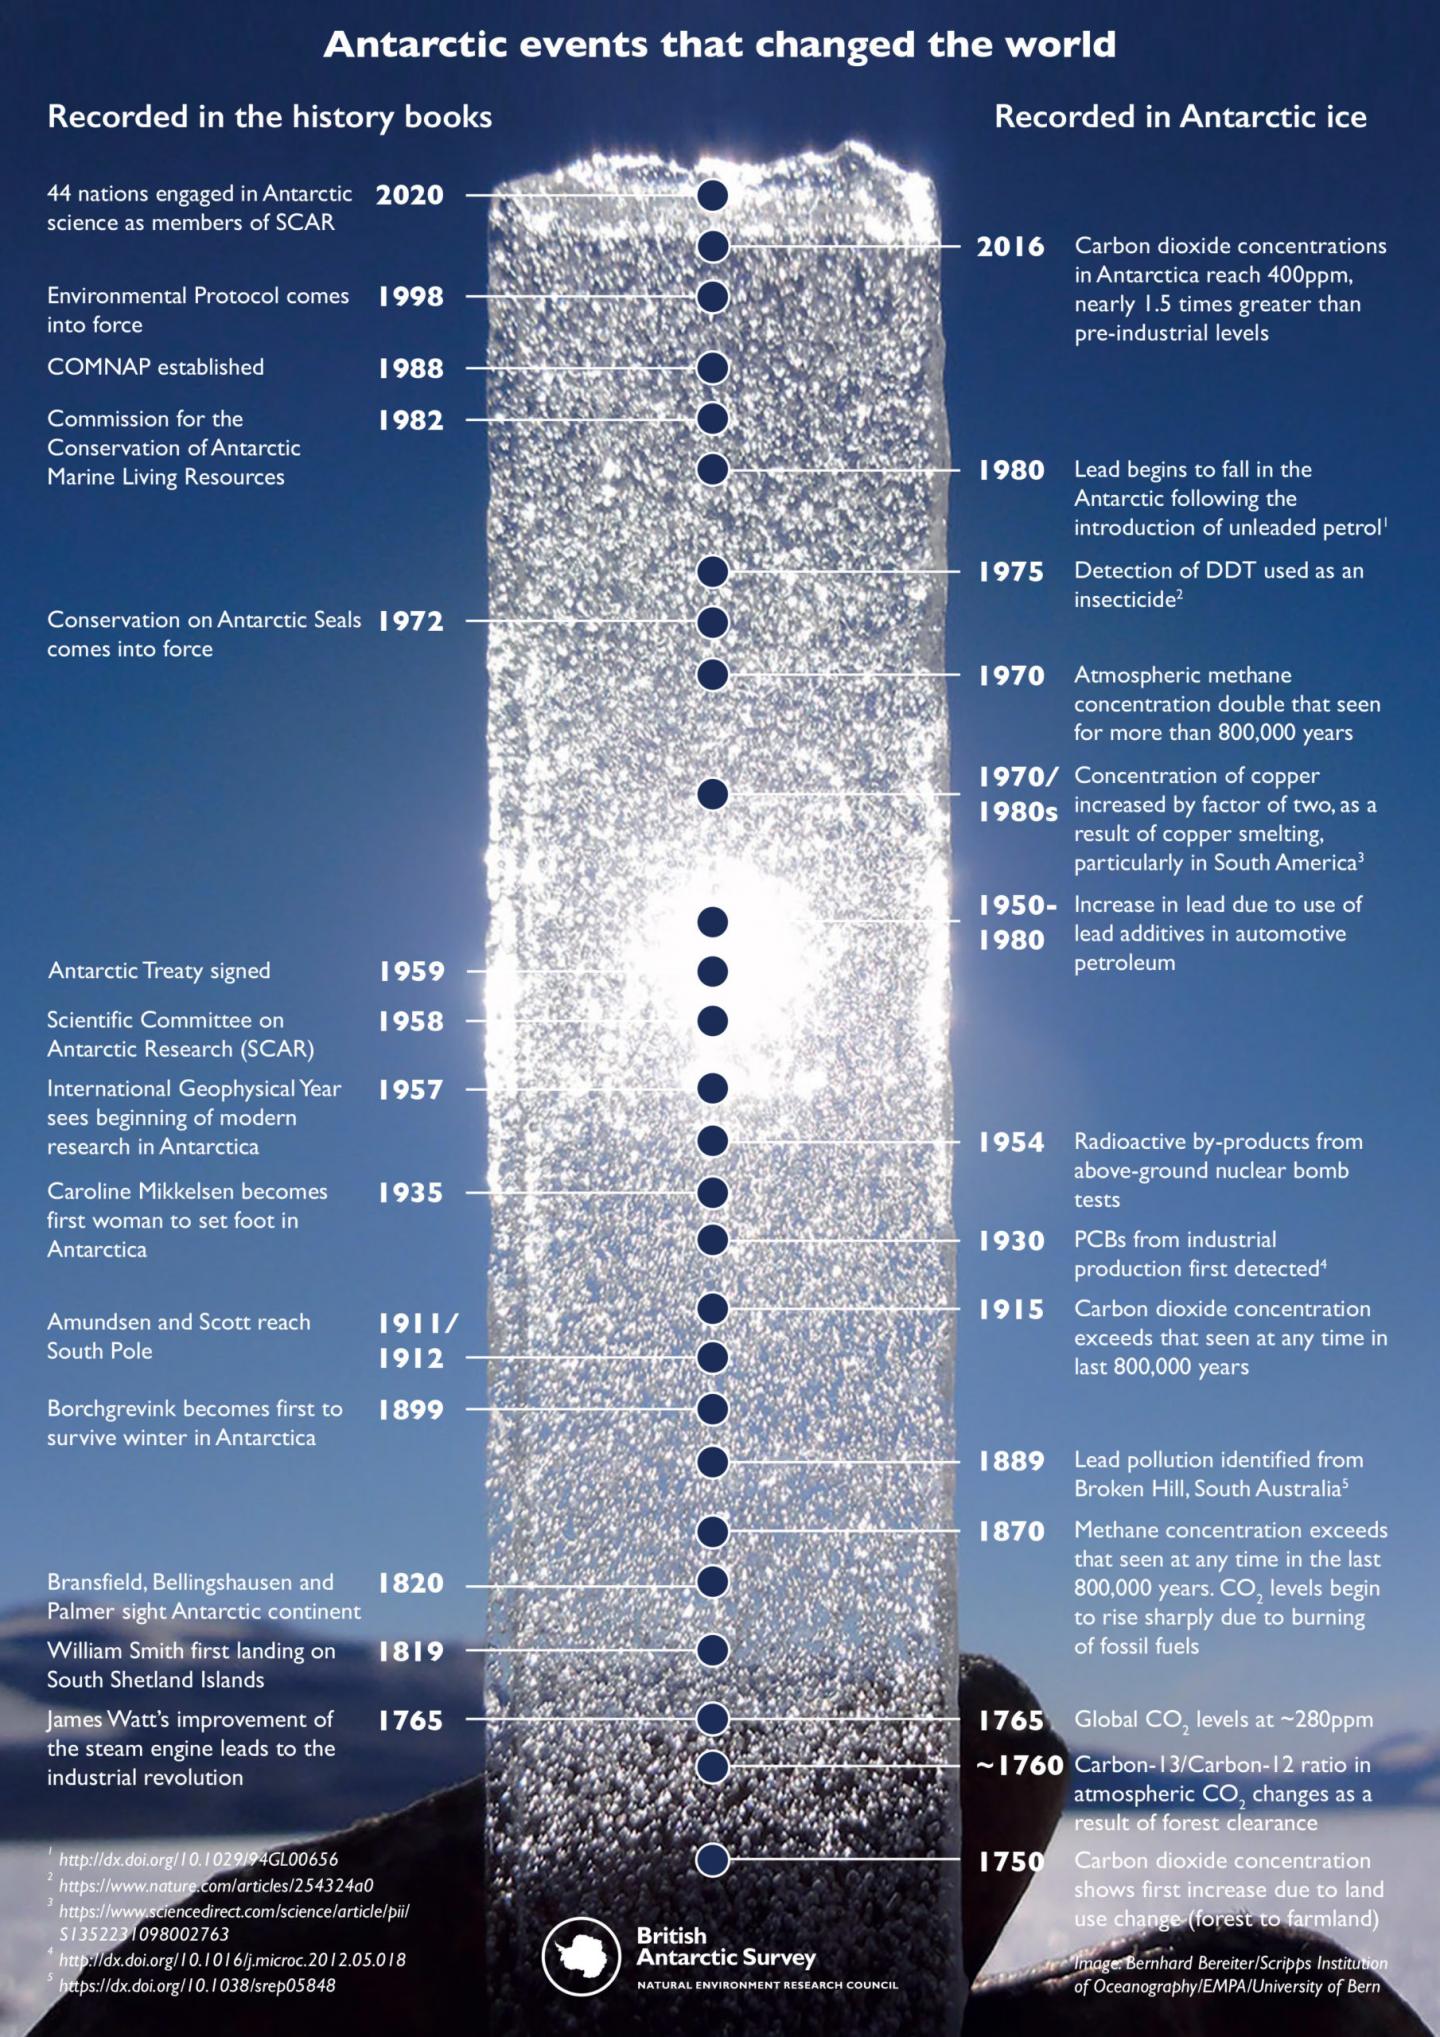 An infographic showing the atmospheric changes that can be captured in ice cores